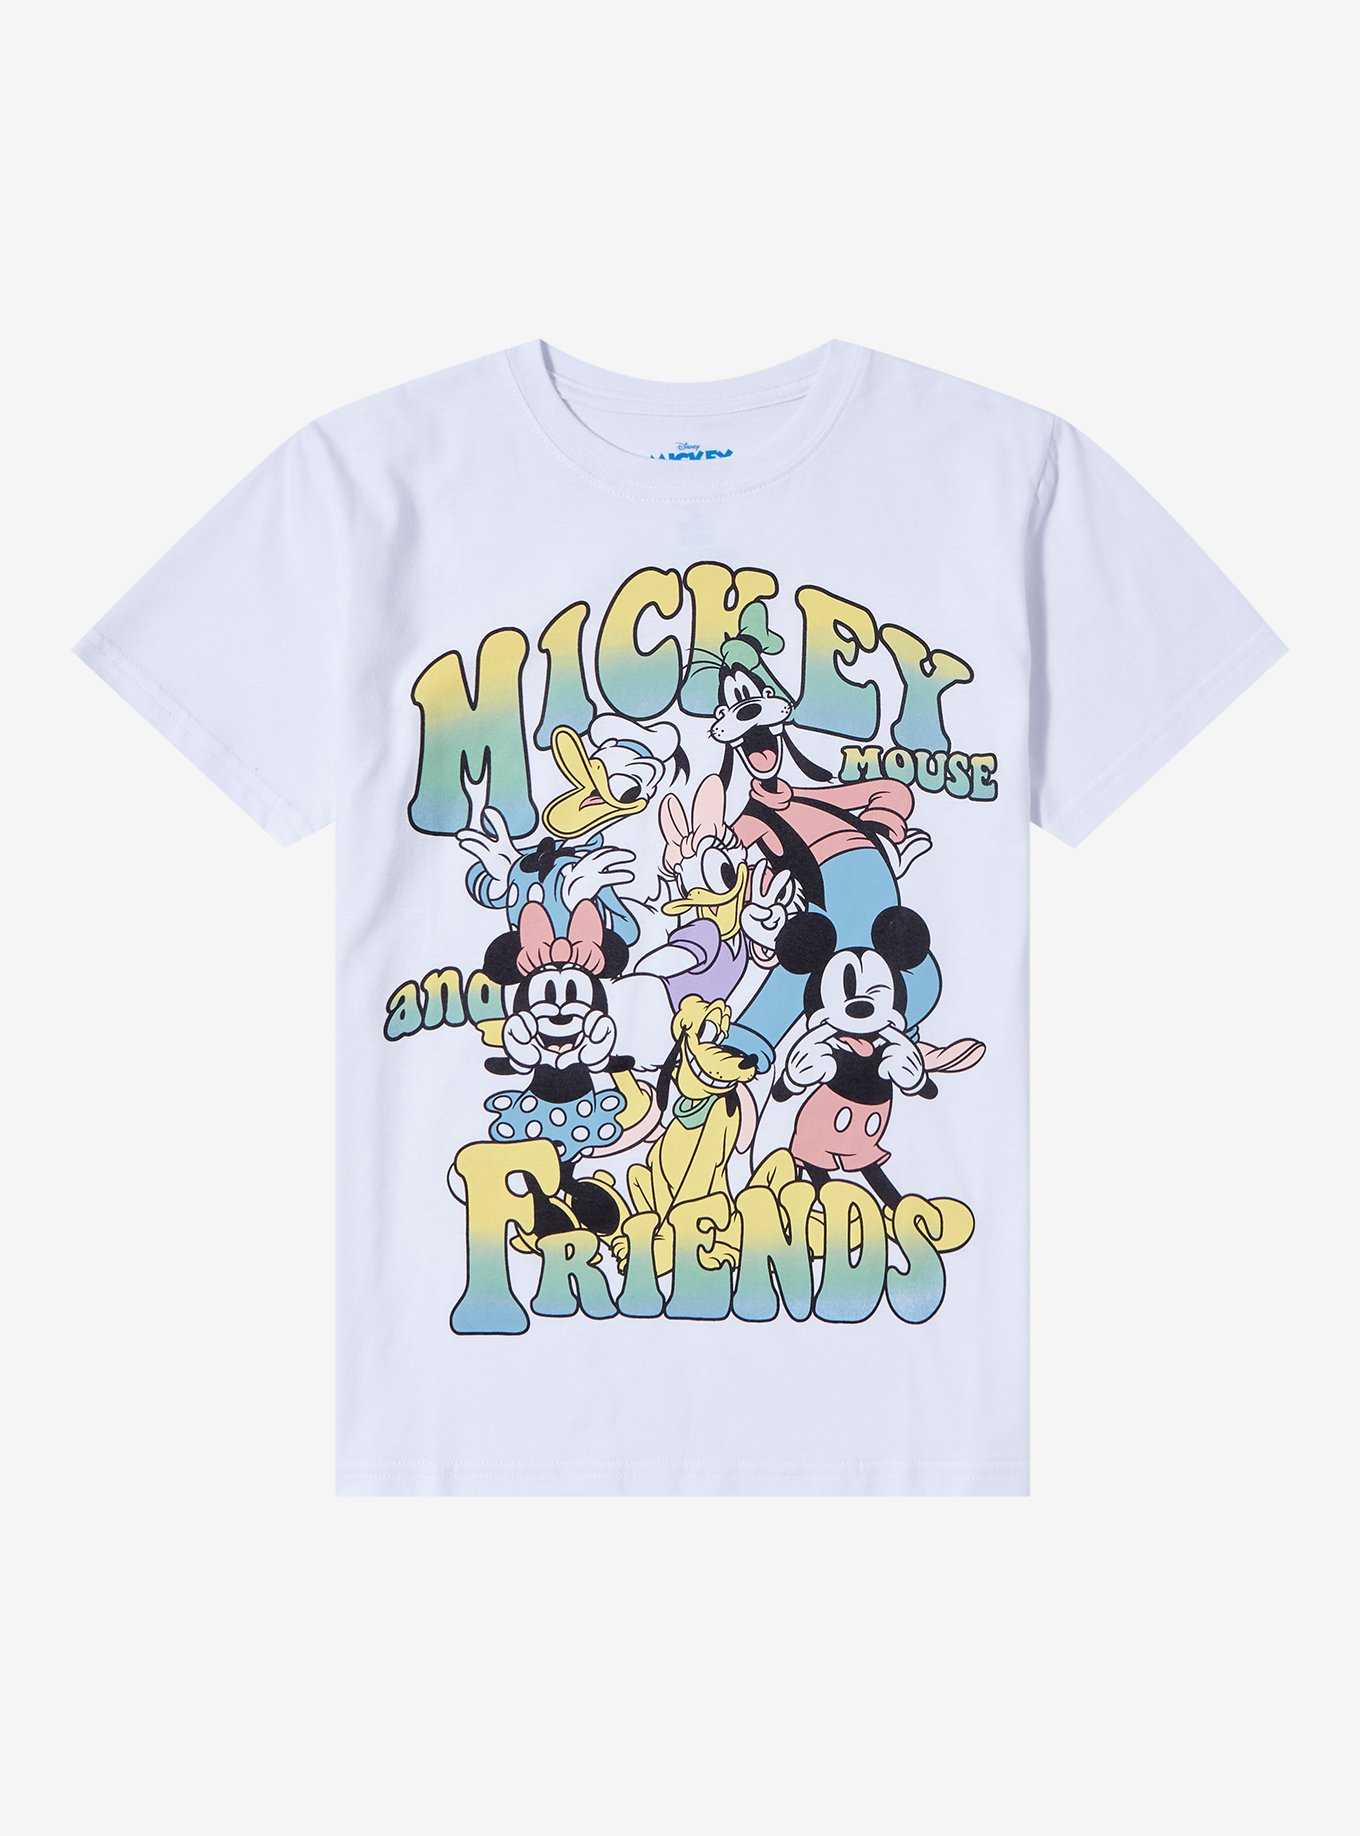 Women's Mickey & Friends Bright Neon Mickey Mouse Outline